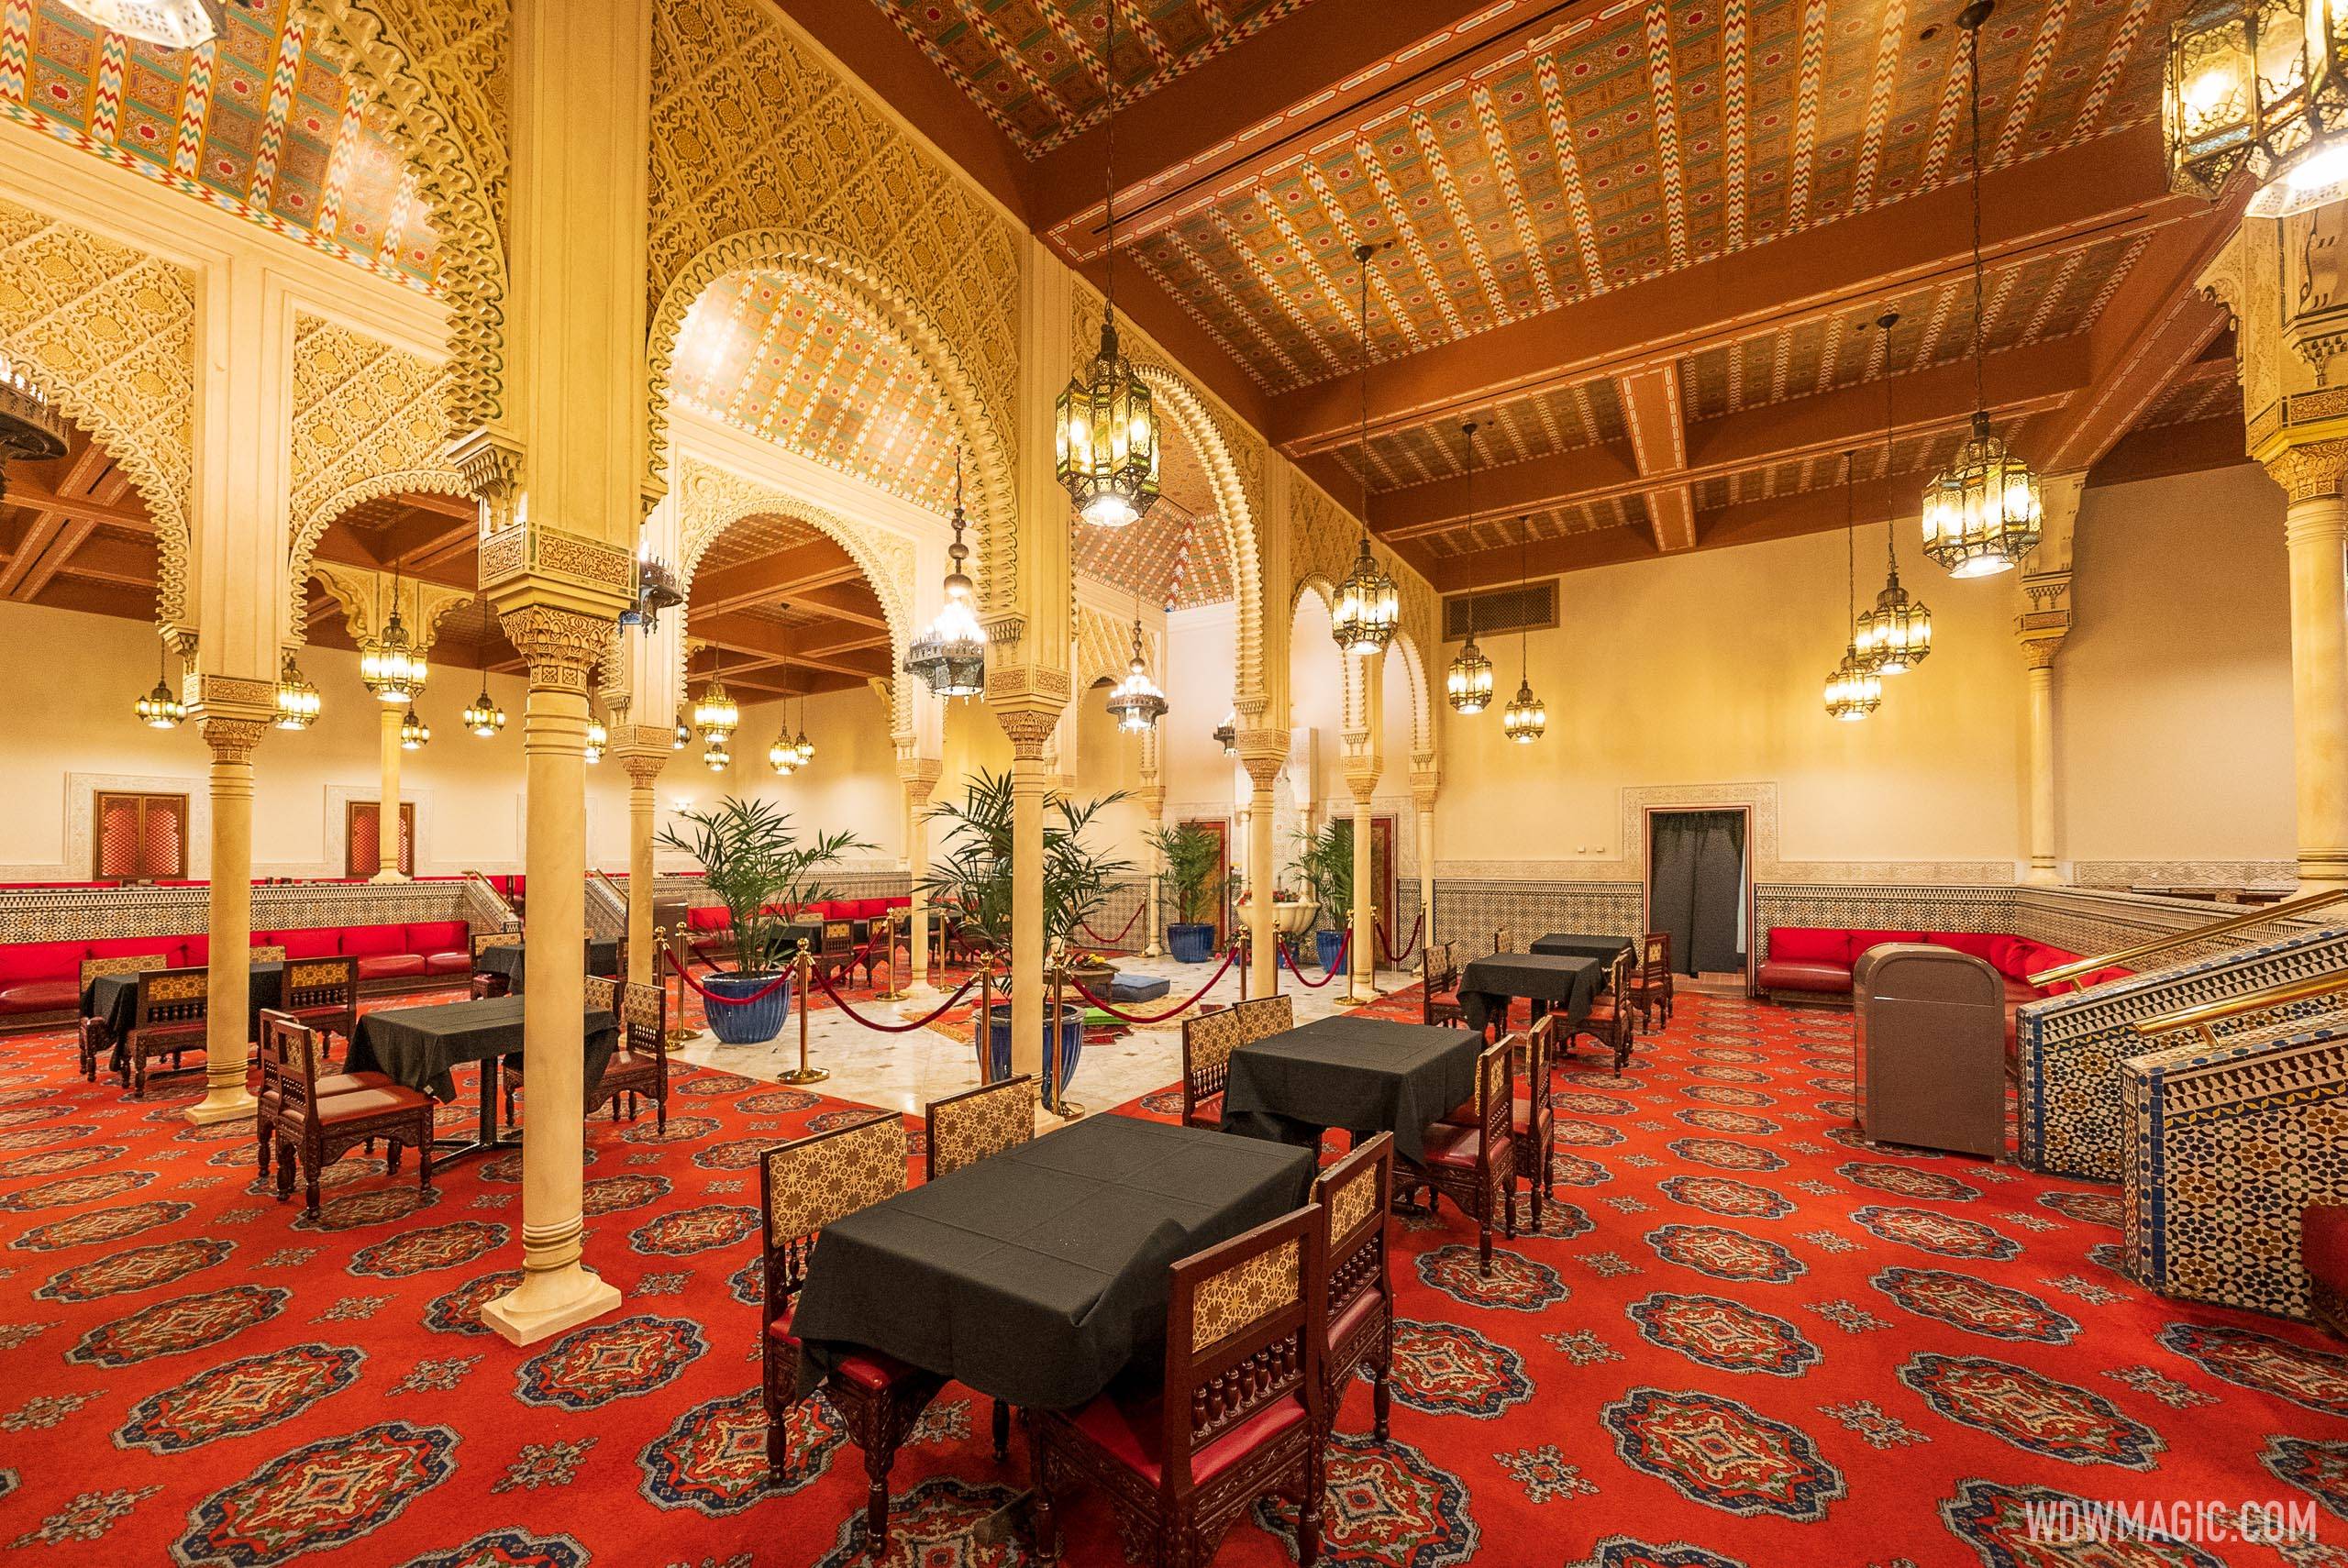 Restaurant Marrakesh is available as an indoor space